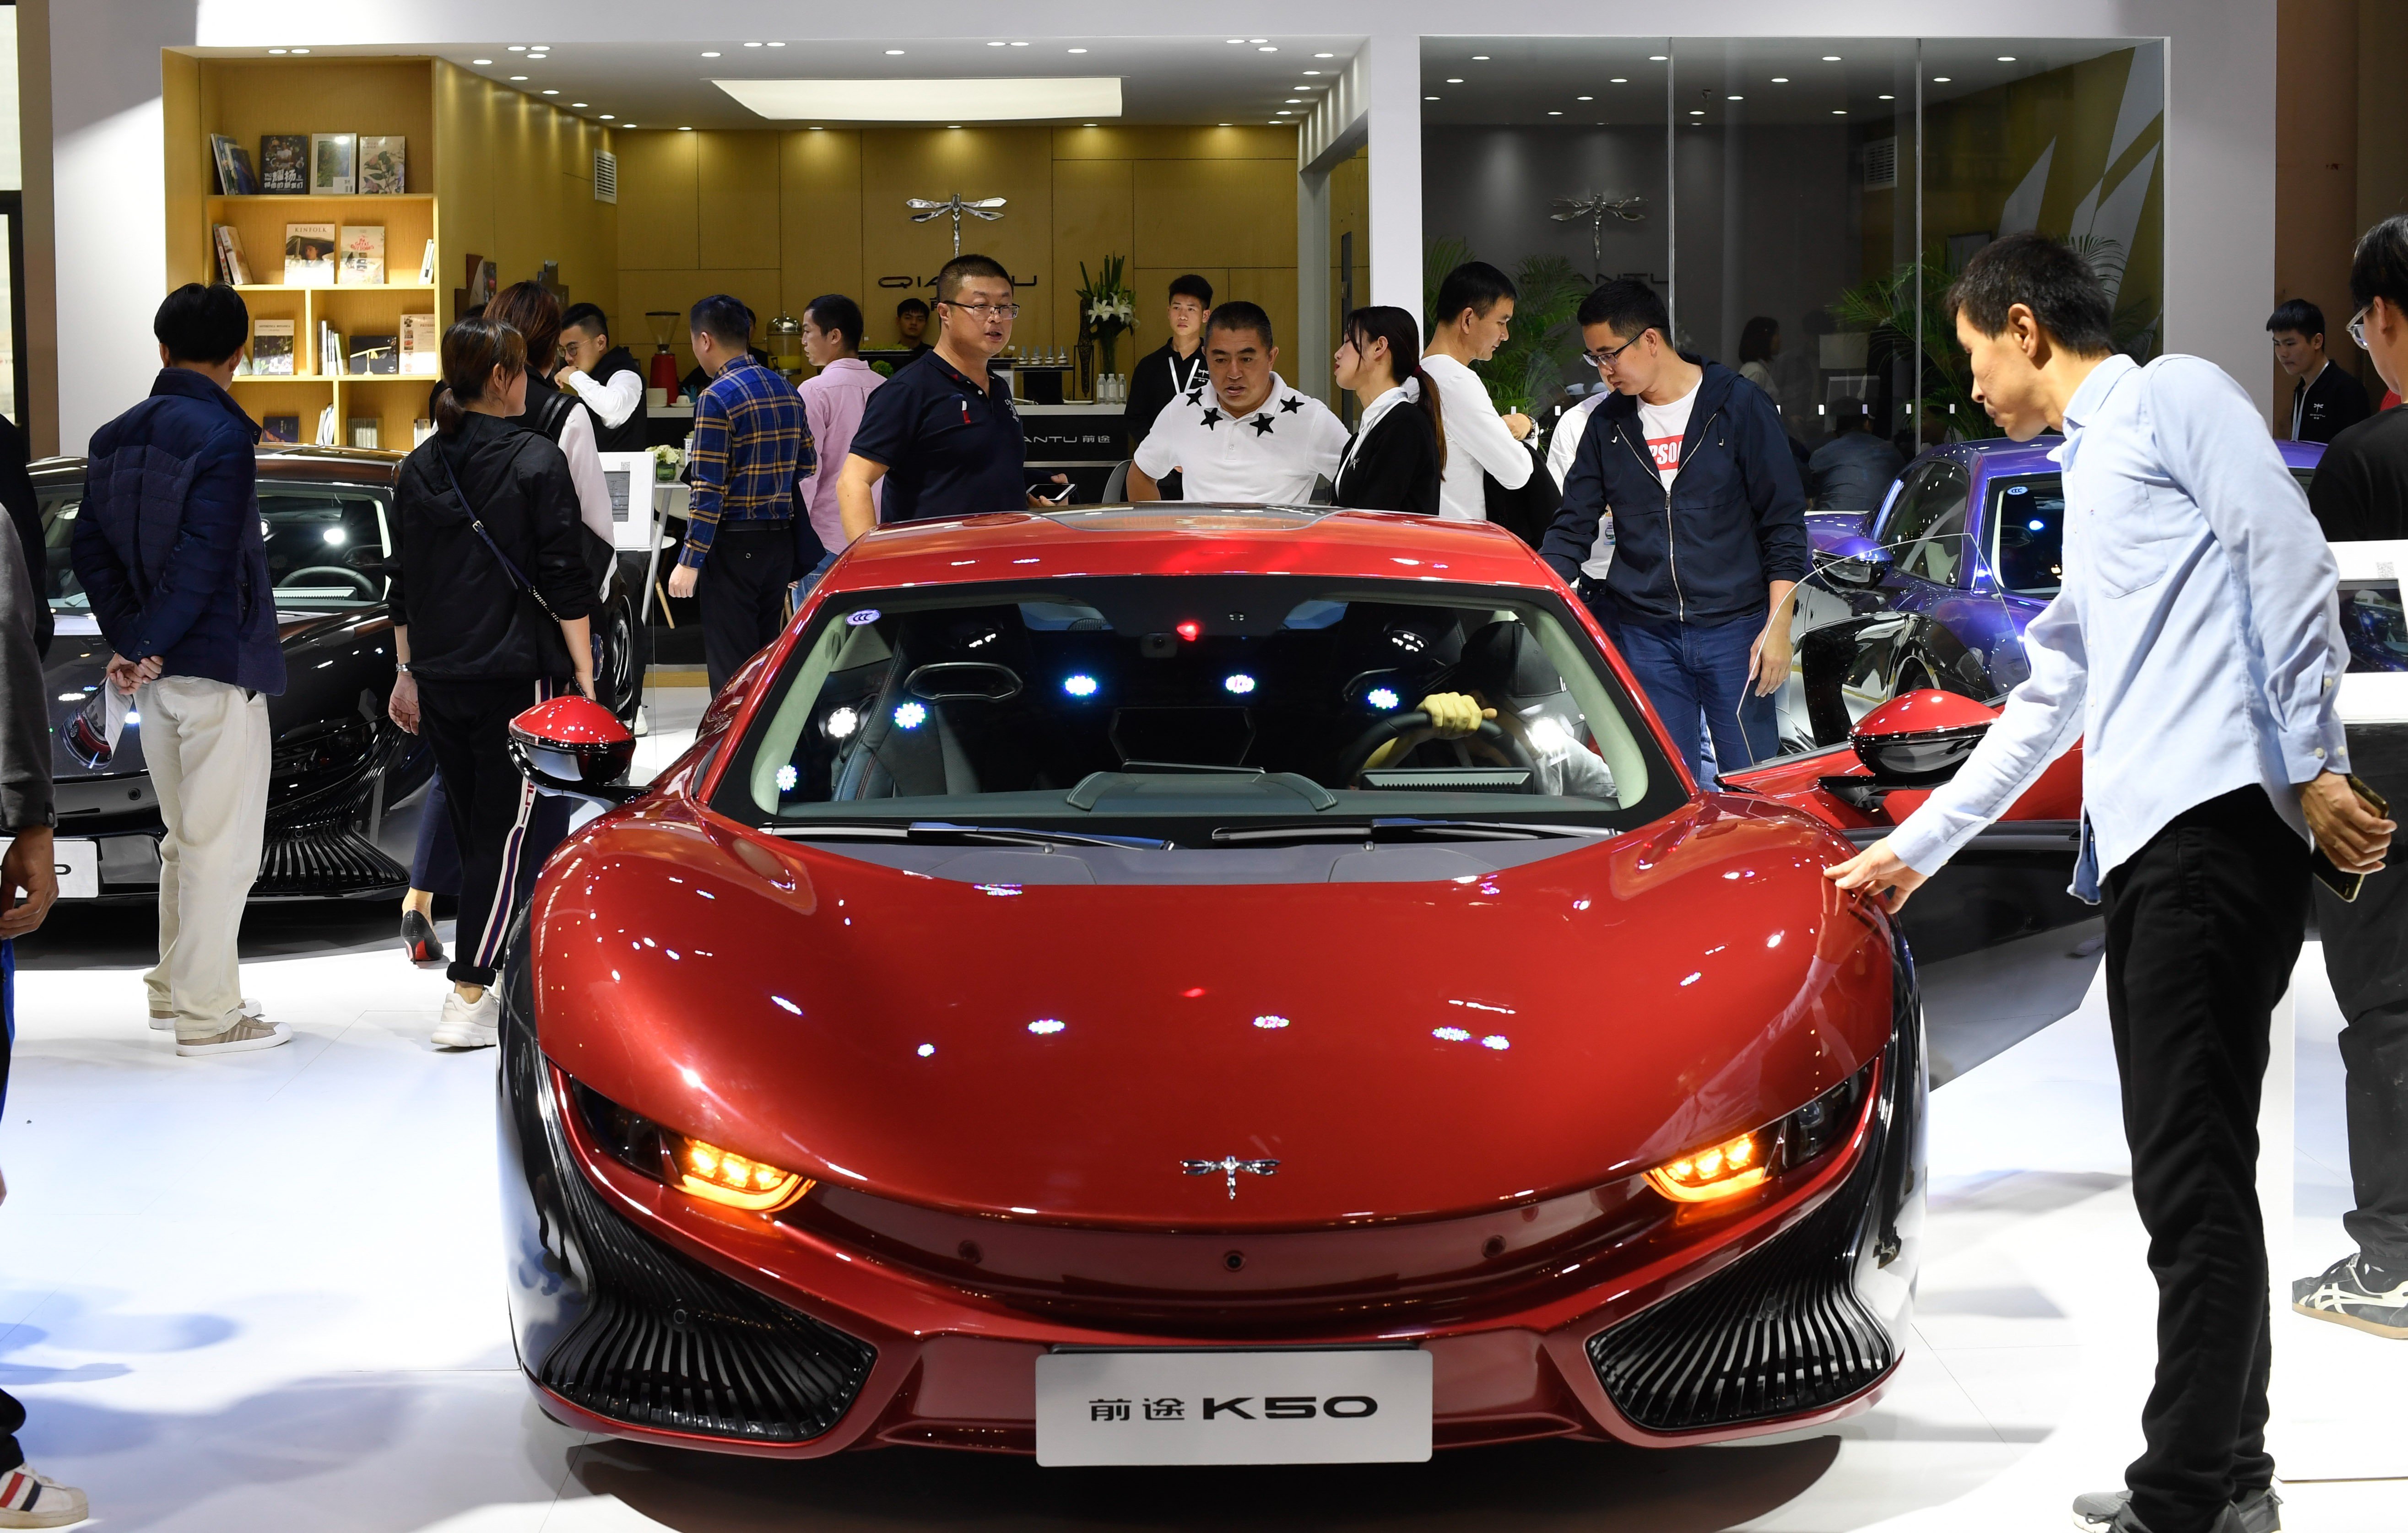 anbefale smerte undervandsbåd Here's why big investing firms are steering clear of China's expensive,  underperforming new-energy car sector | South China Morning Post